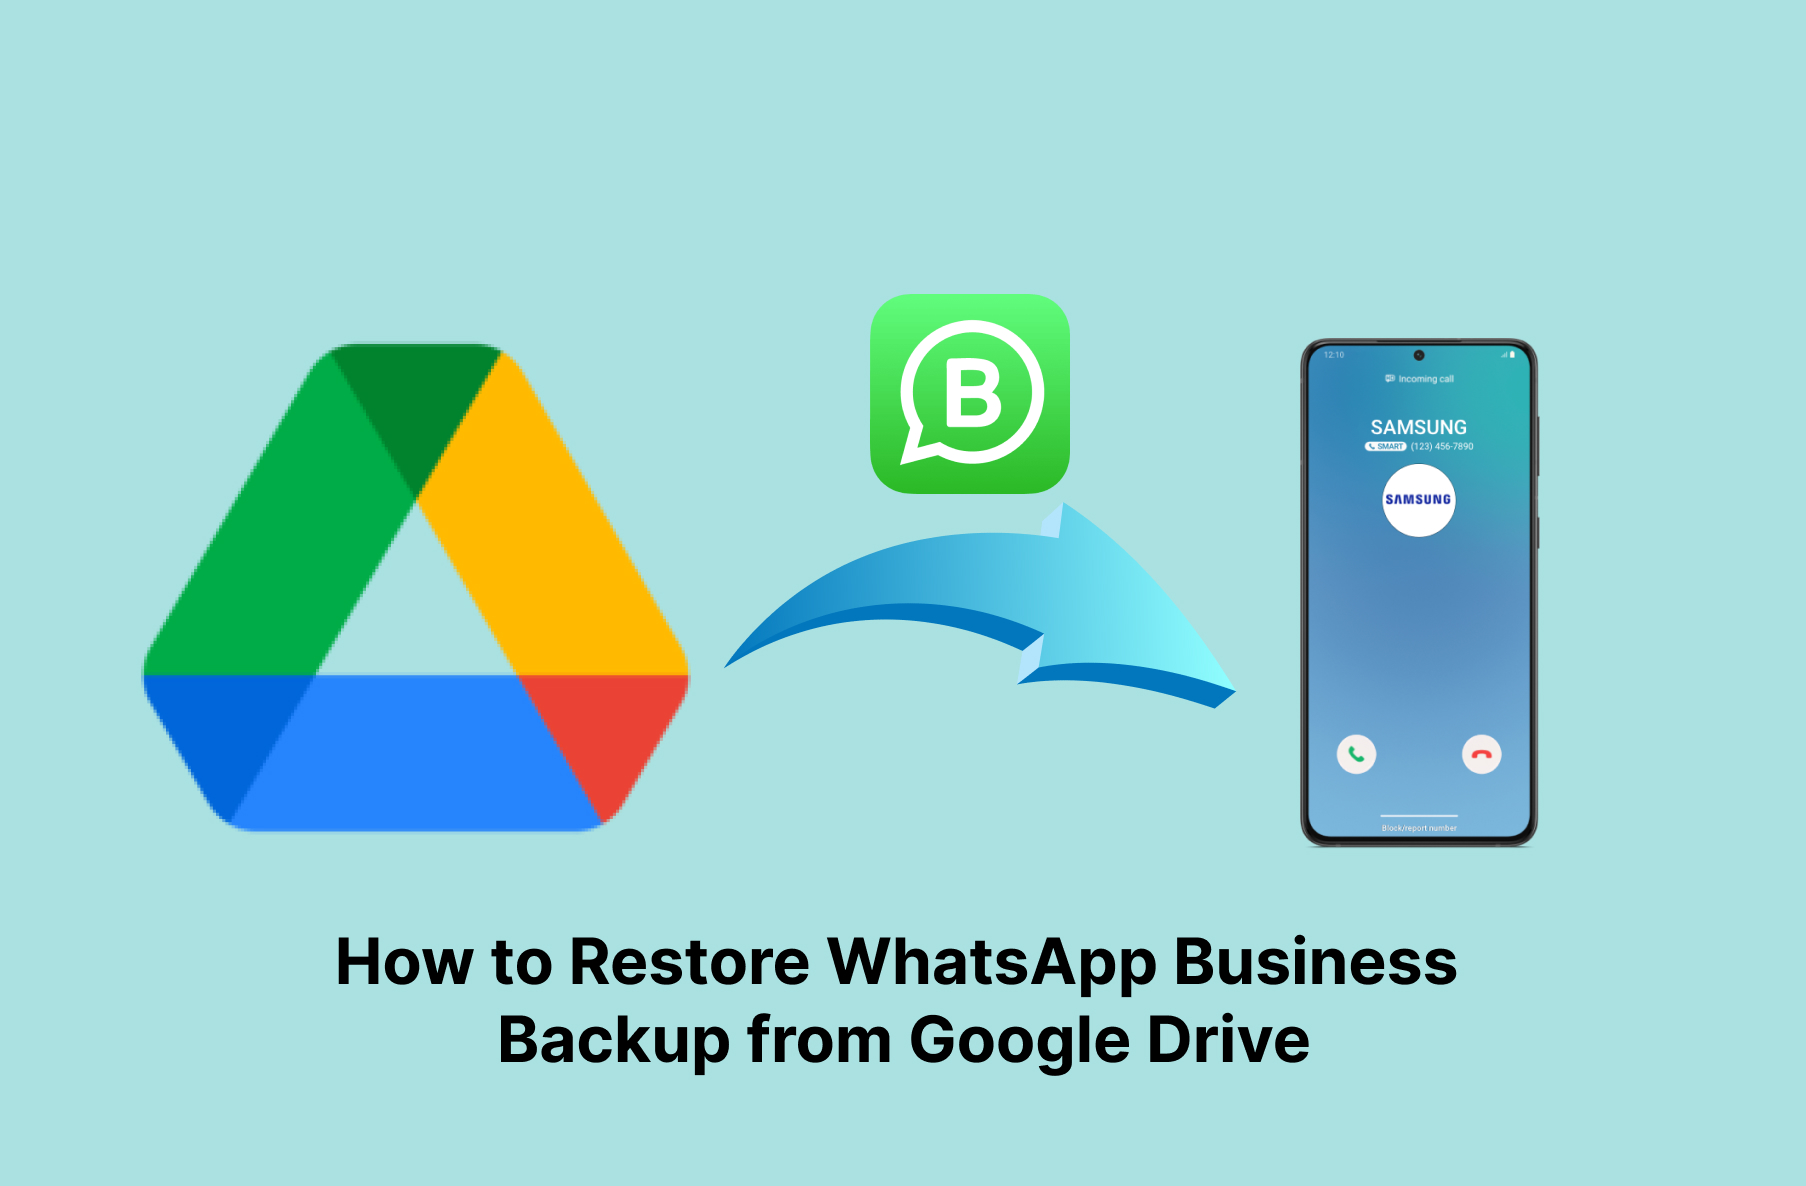 How to Restore WhatsApp Business Backup from Google Drive